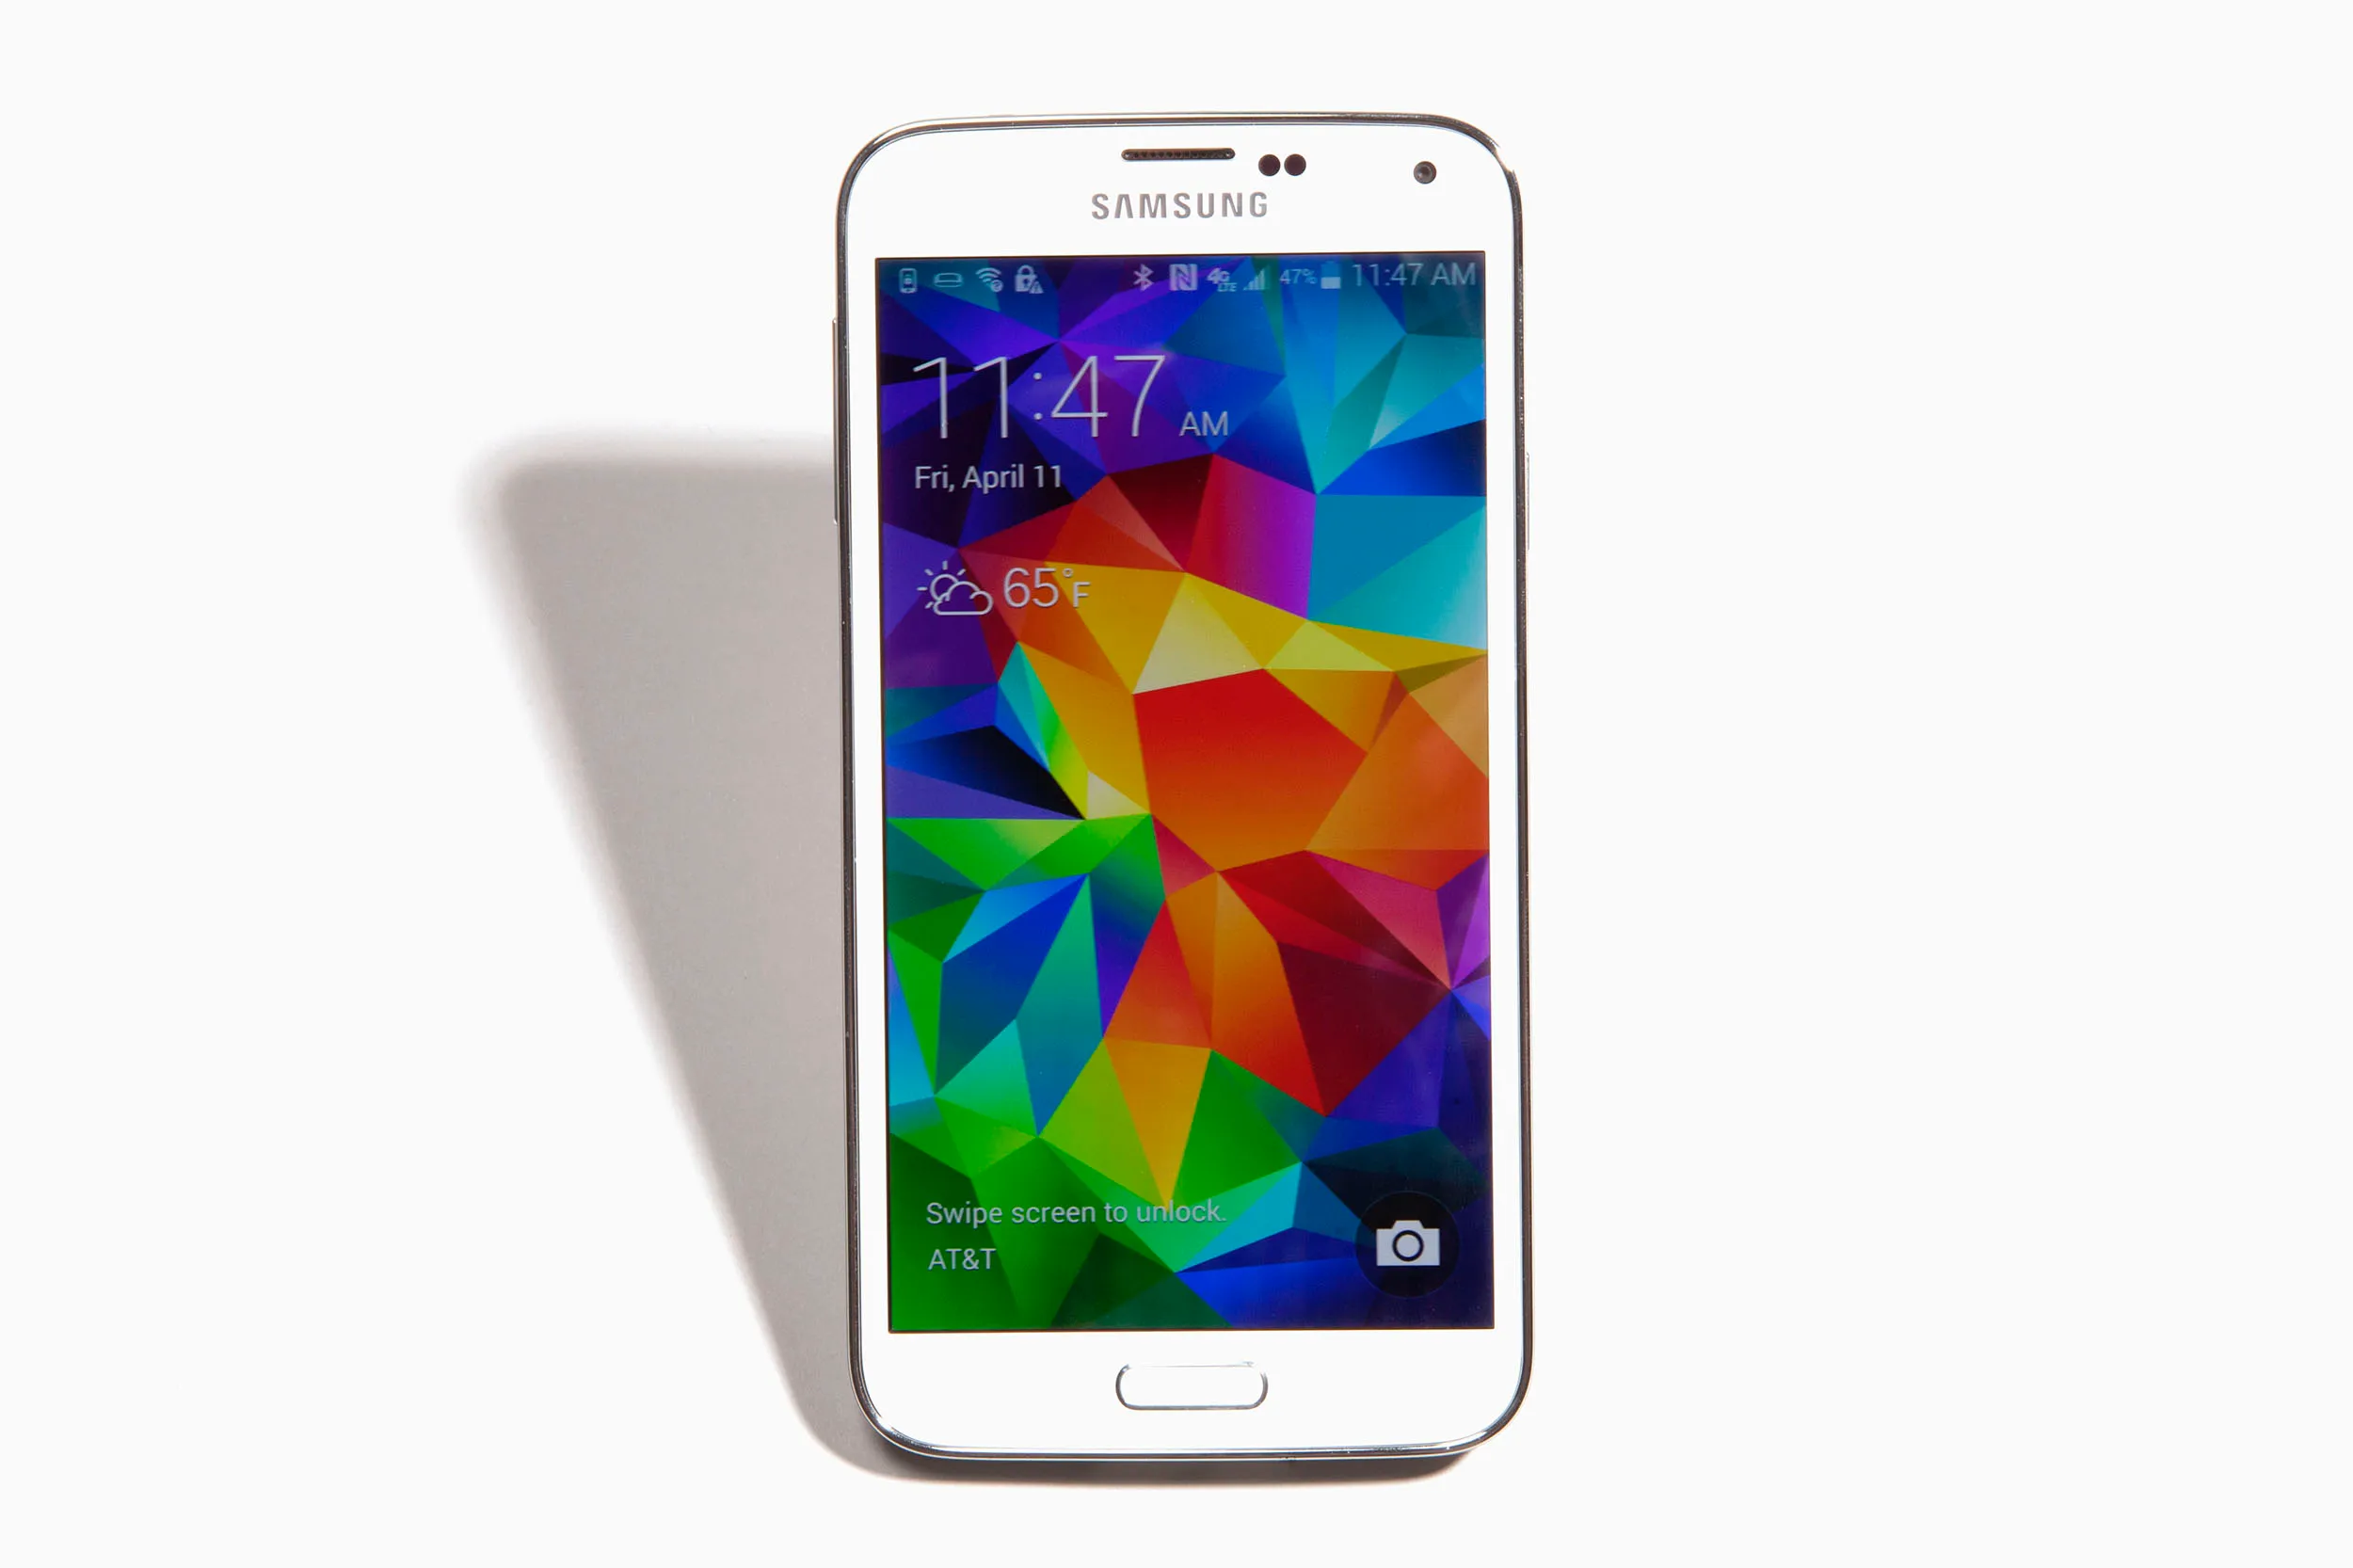 How to fix when you can't make or receive calls on Samsung Galaxy S5